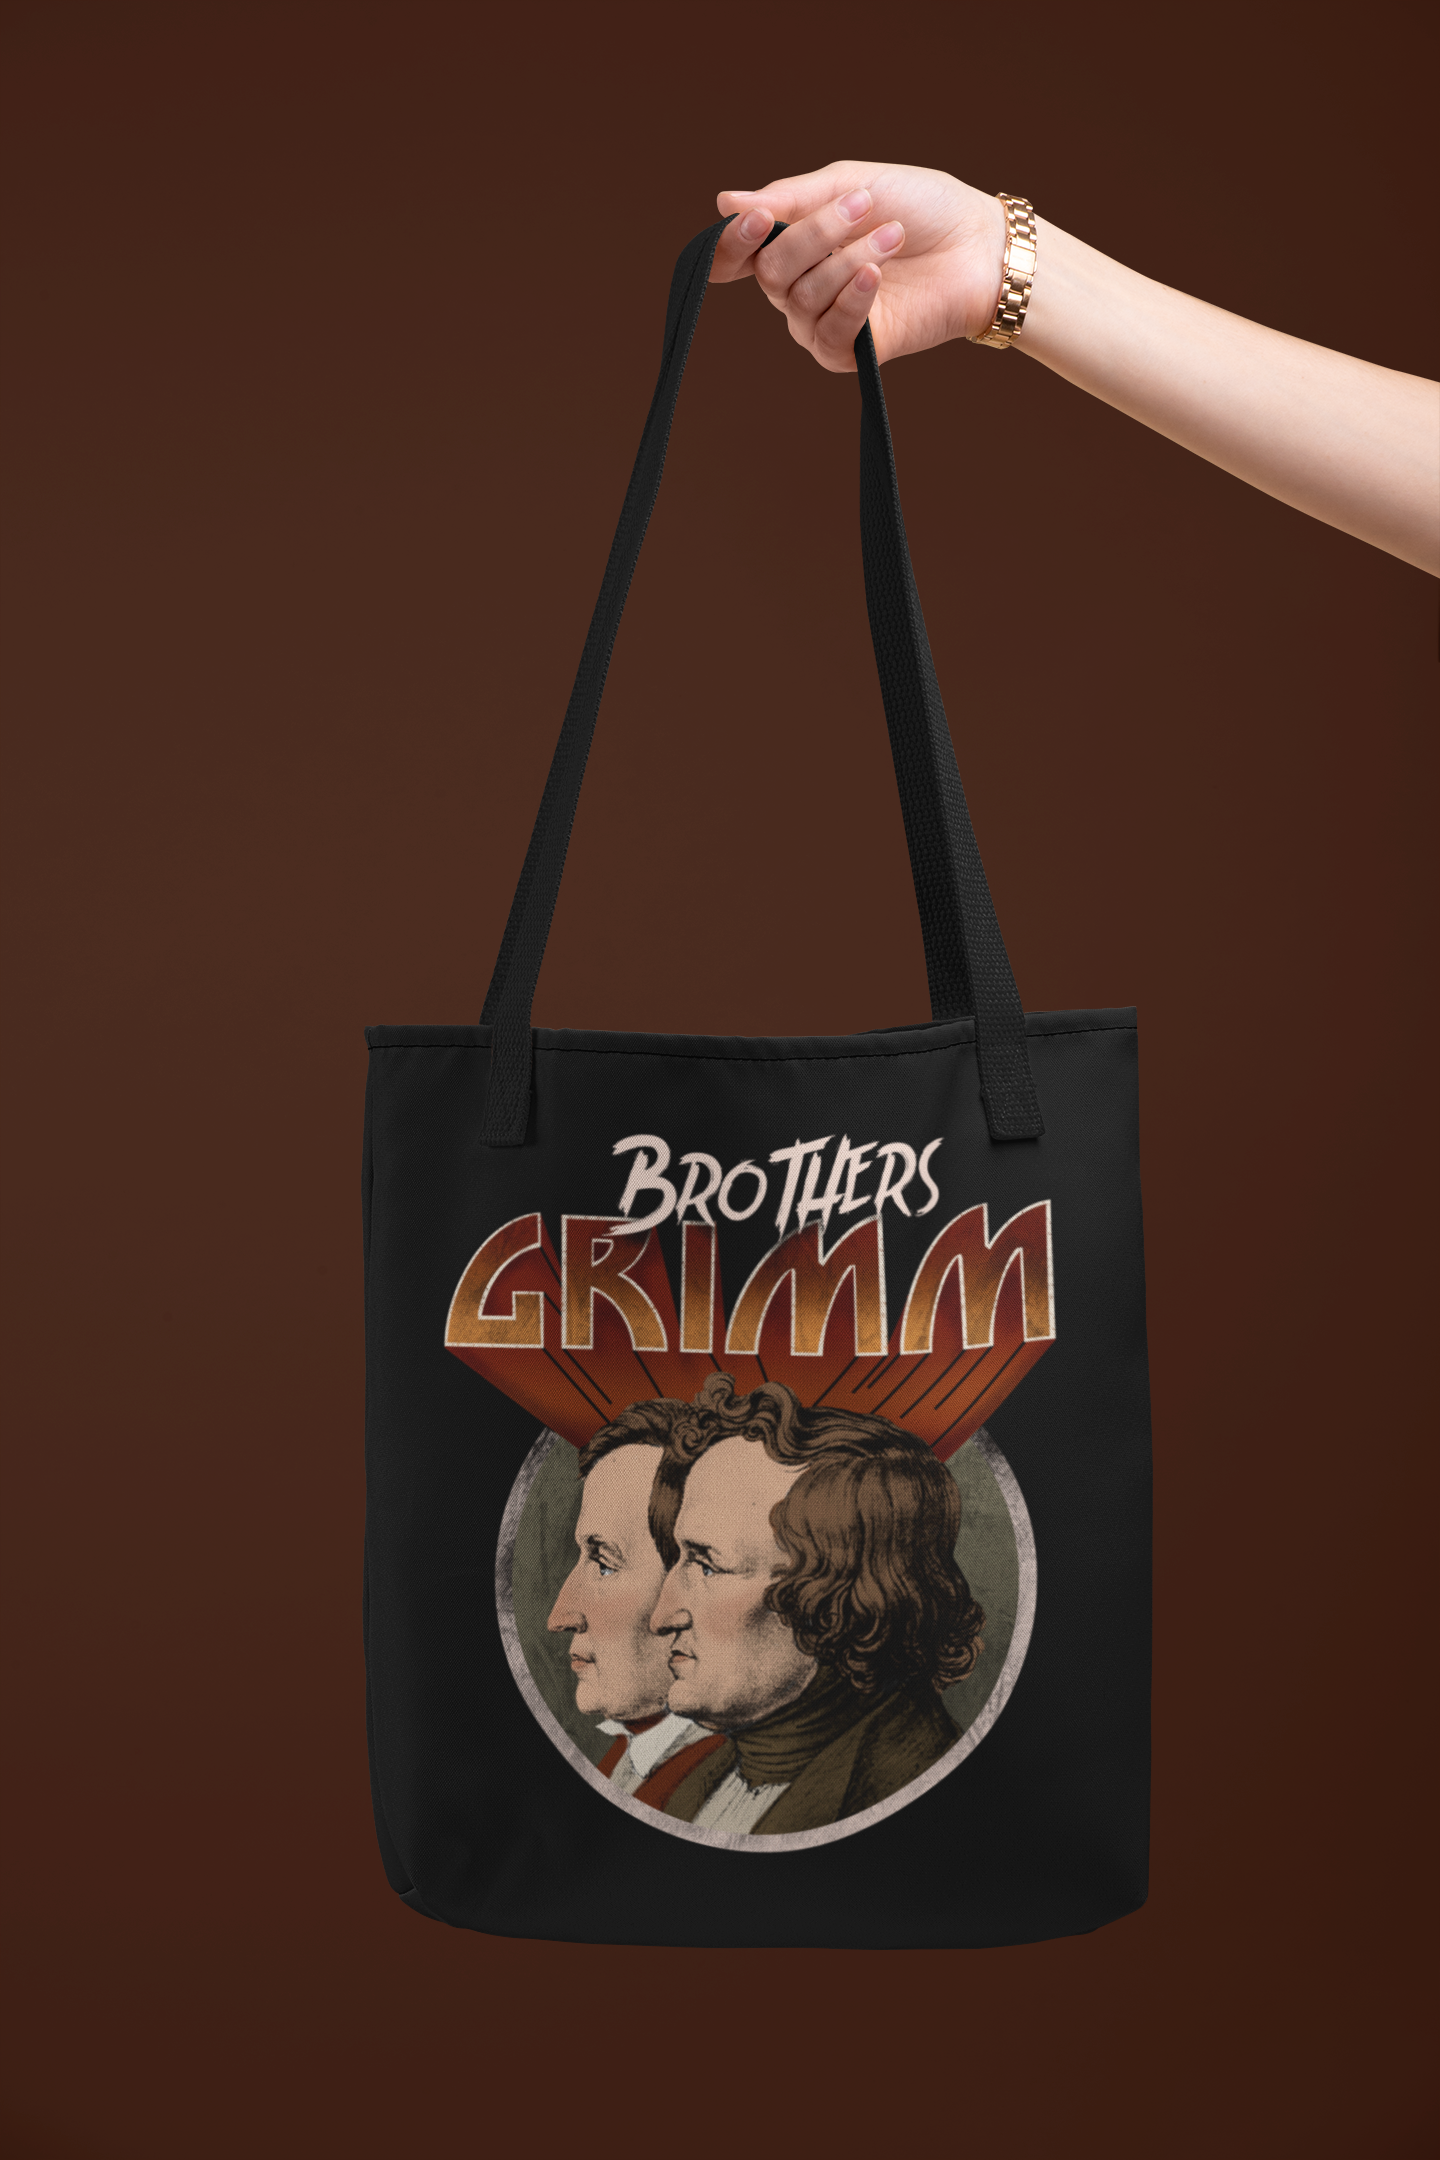 Brothers Grimm Tote